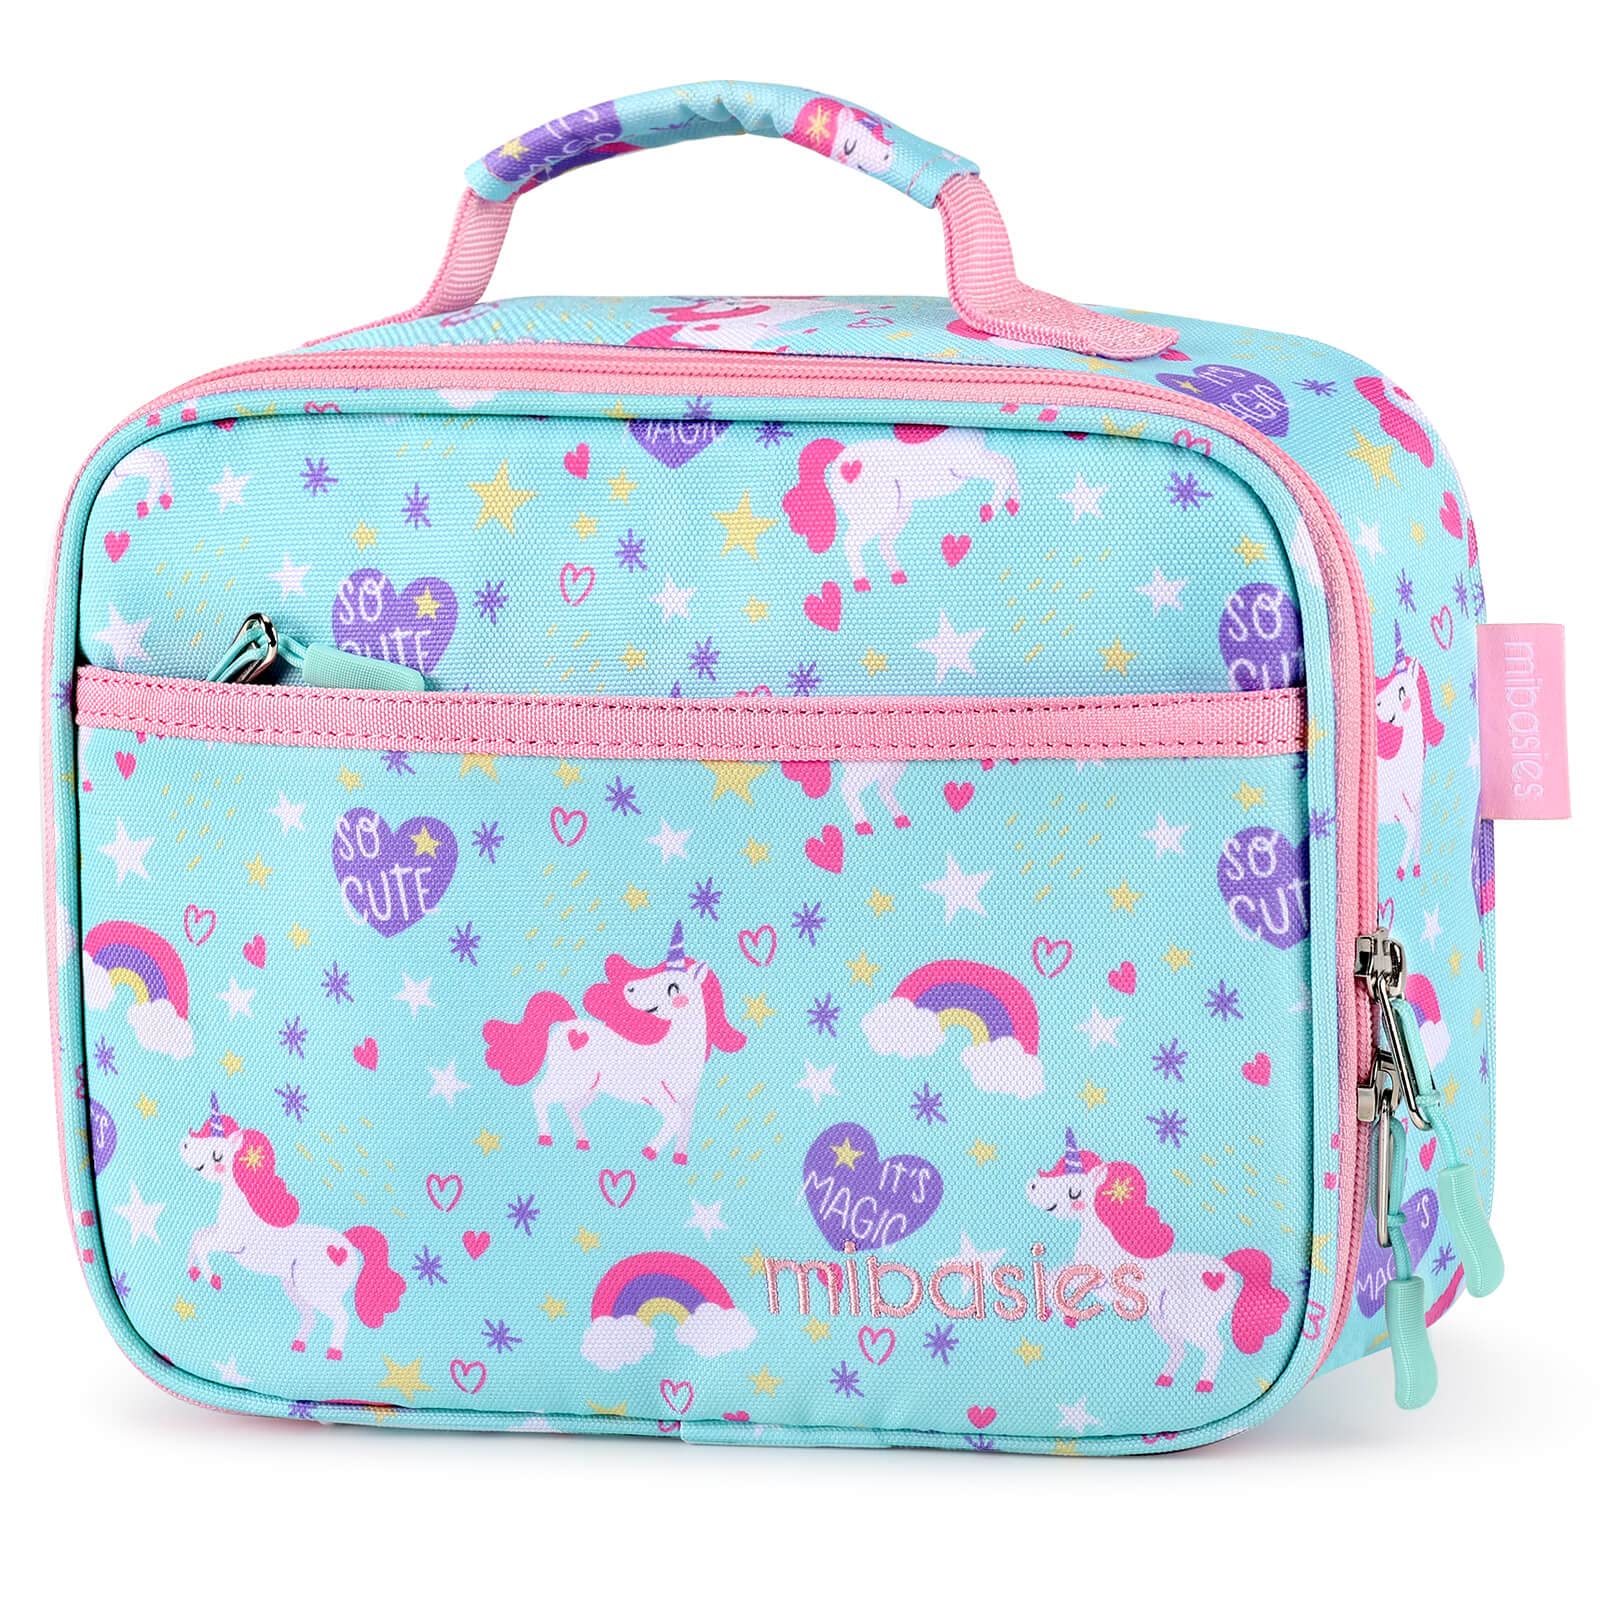 mibasies Unicorn Lunch Bag Kids Insulated Lunch Box for Girls with Water  Bottle Holder and Shoulder Strap (Mermaid Blue Purple)